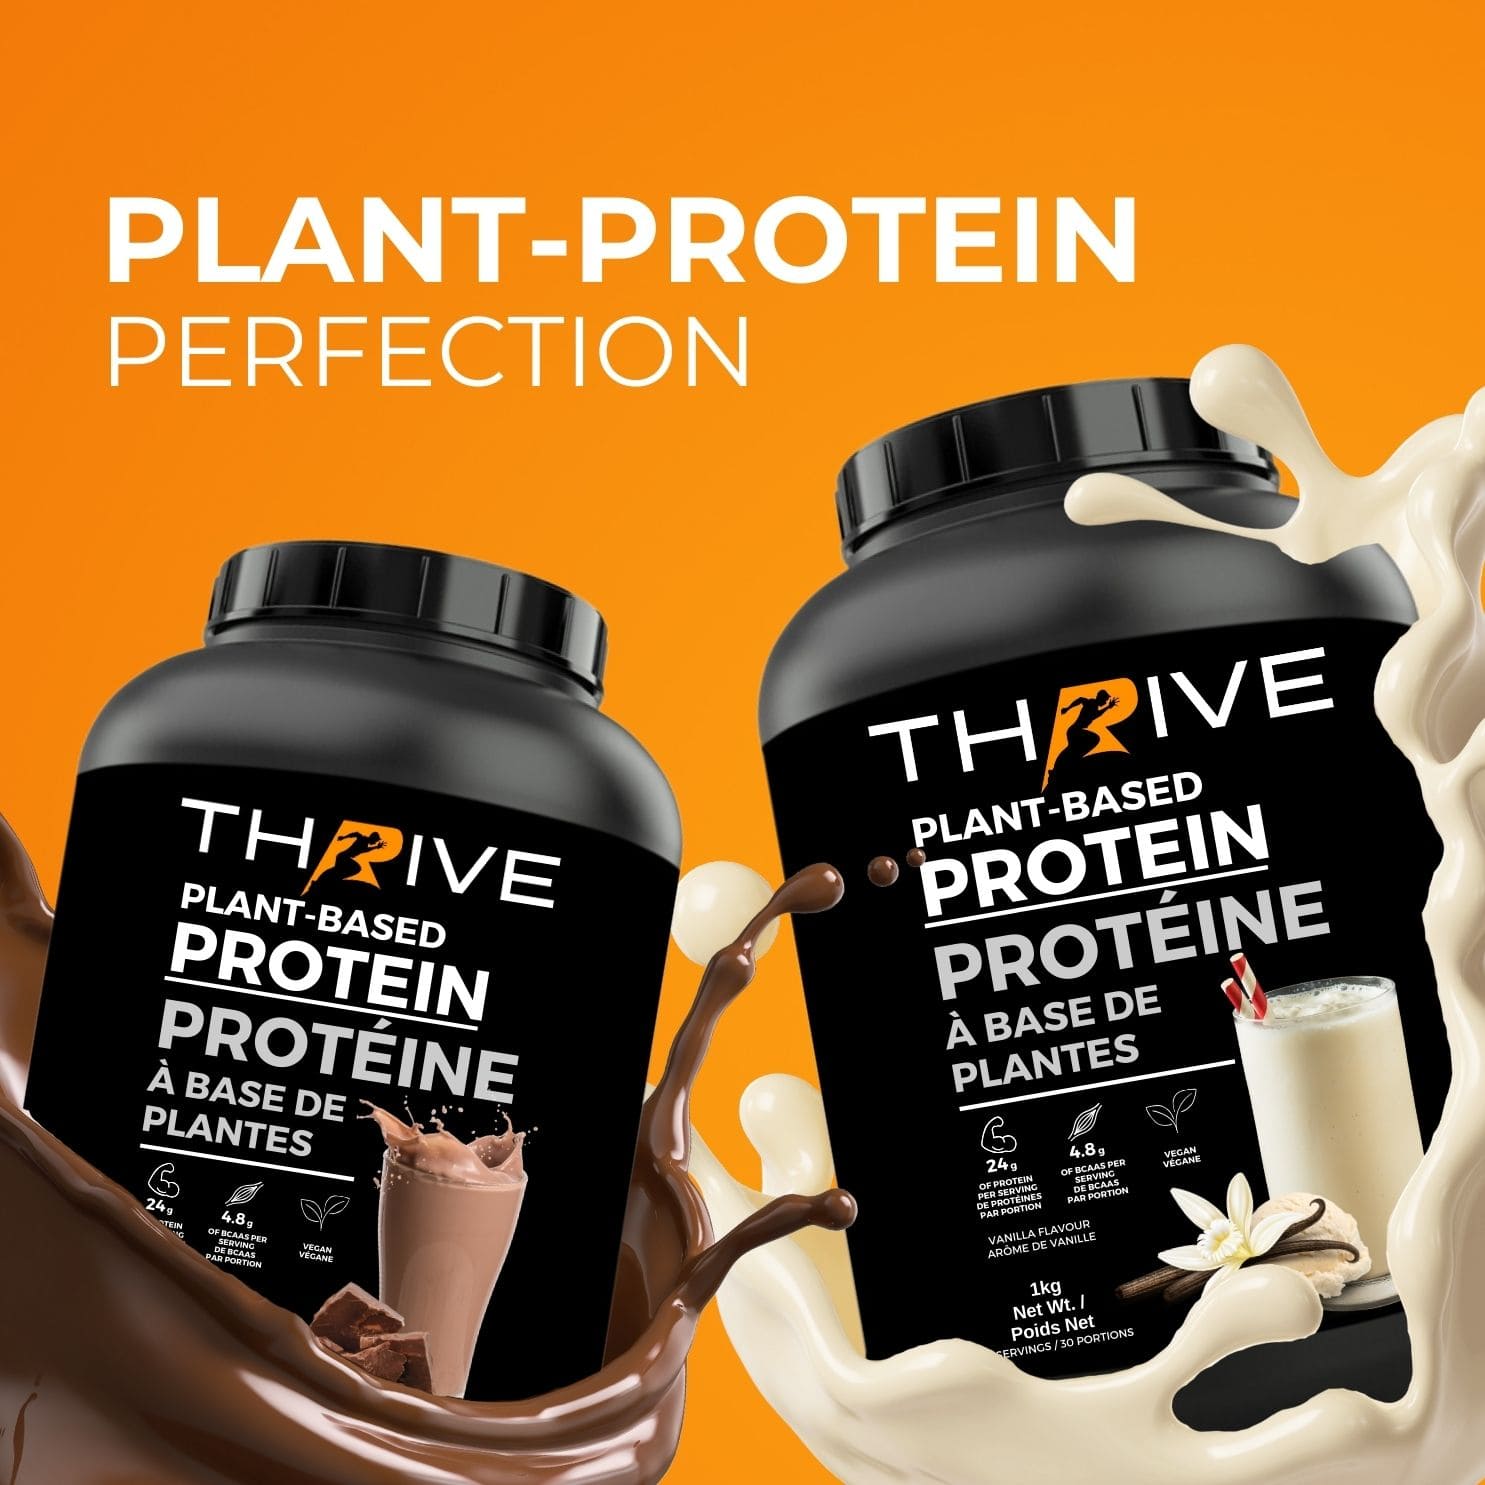 Thrive Plant-Based Protein